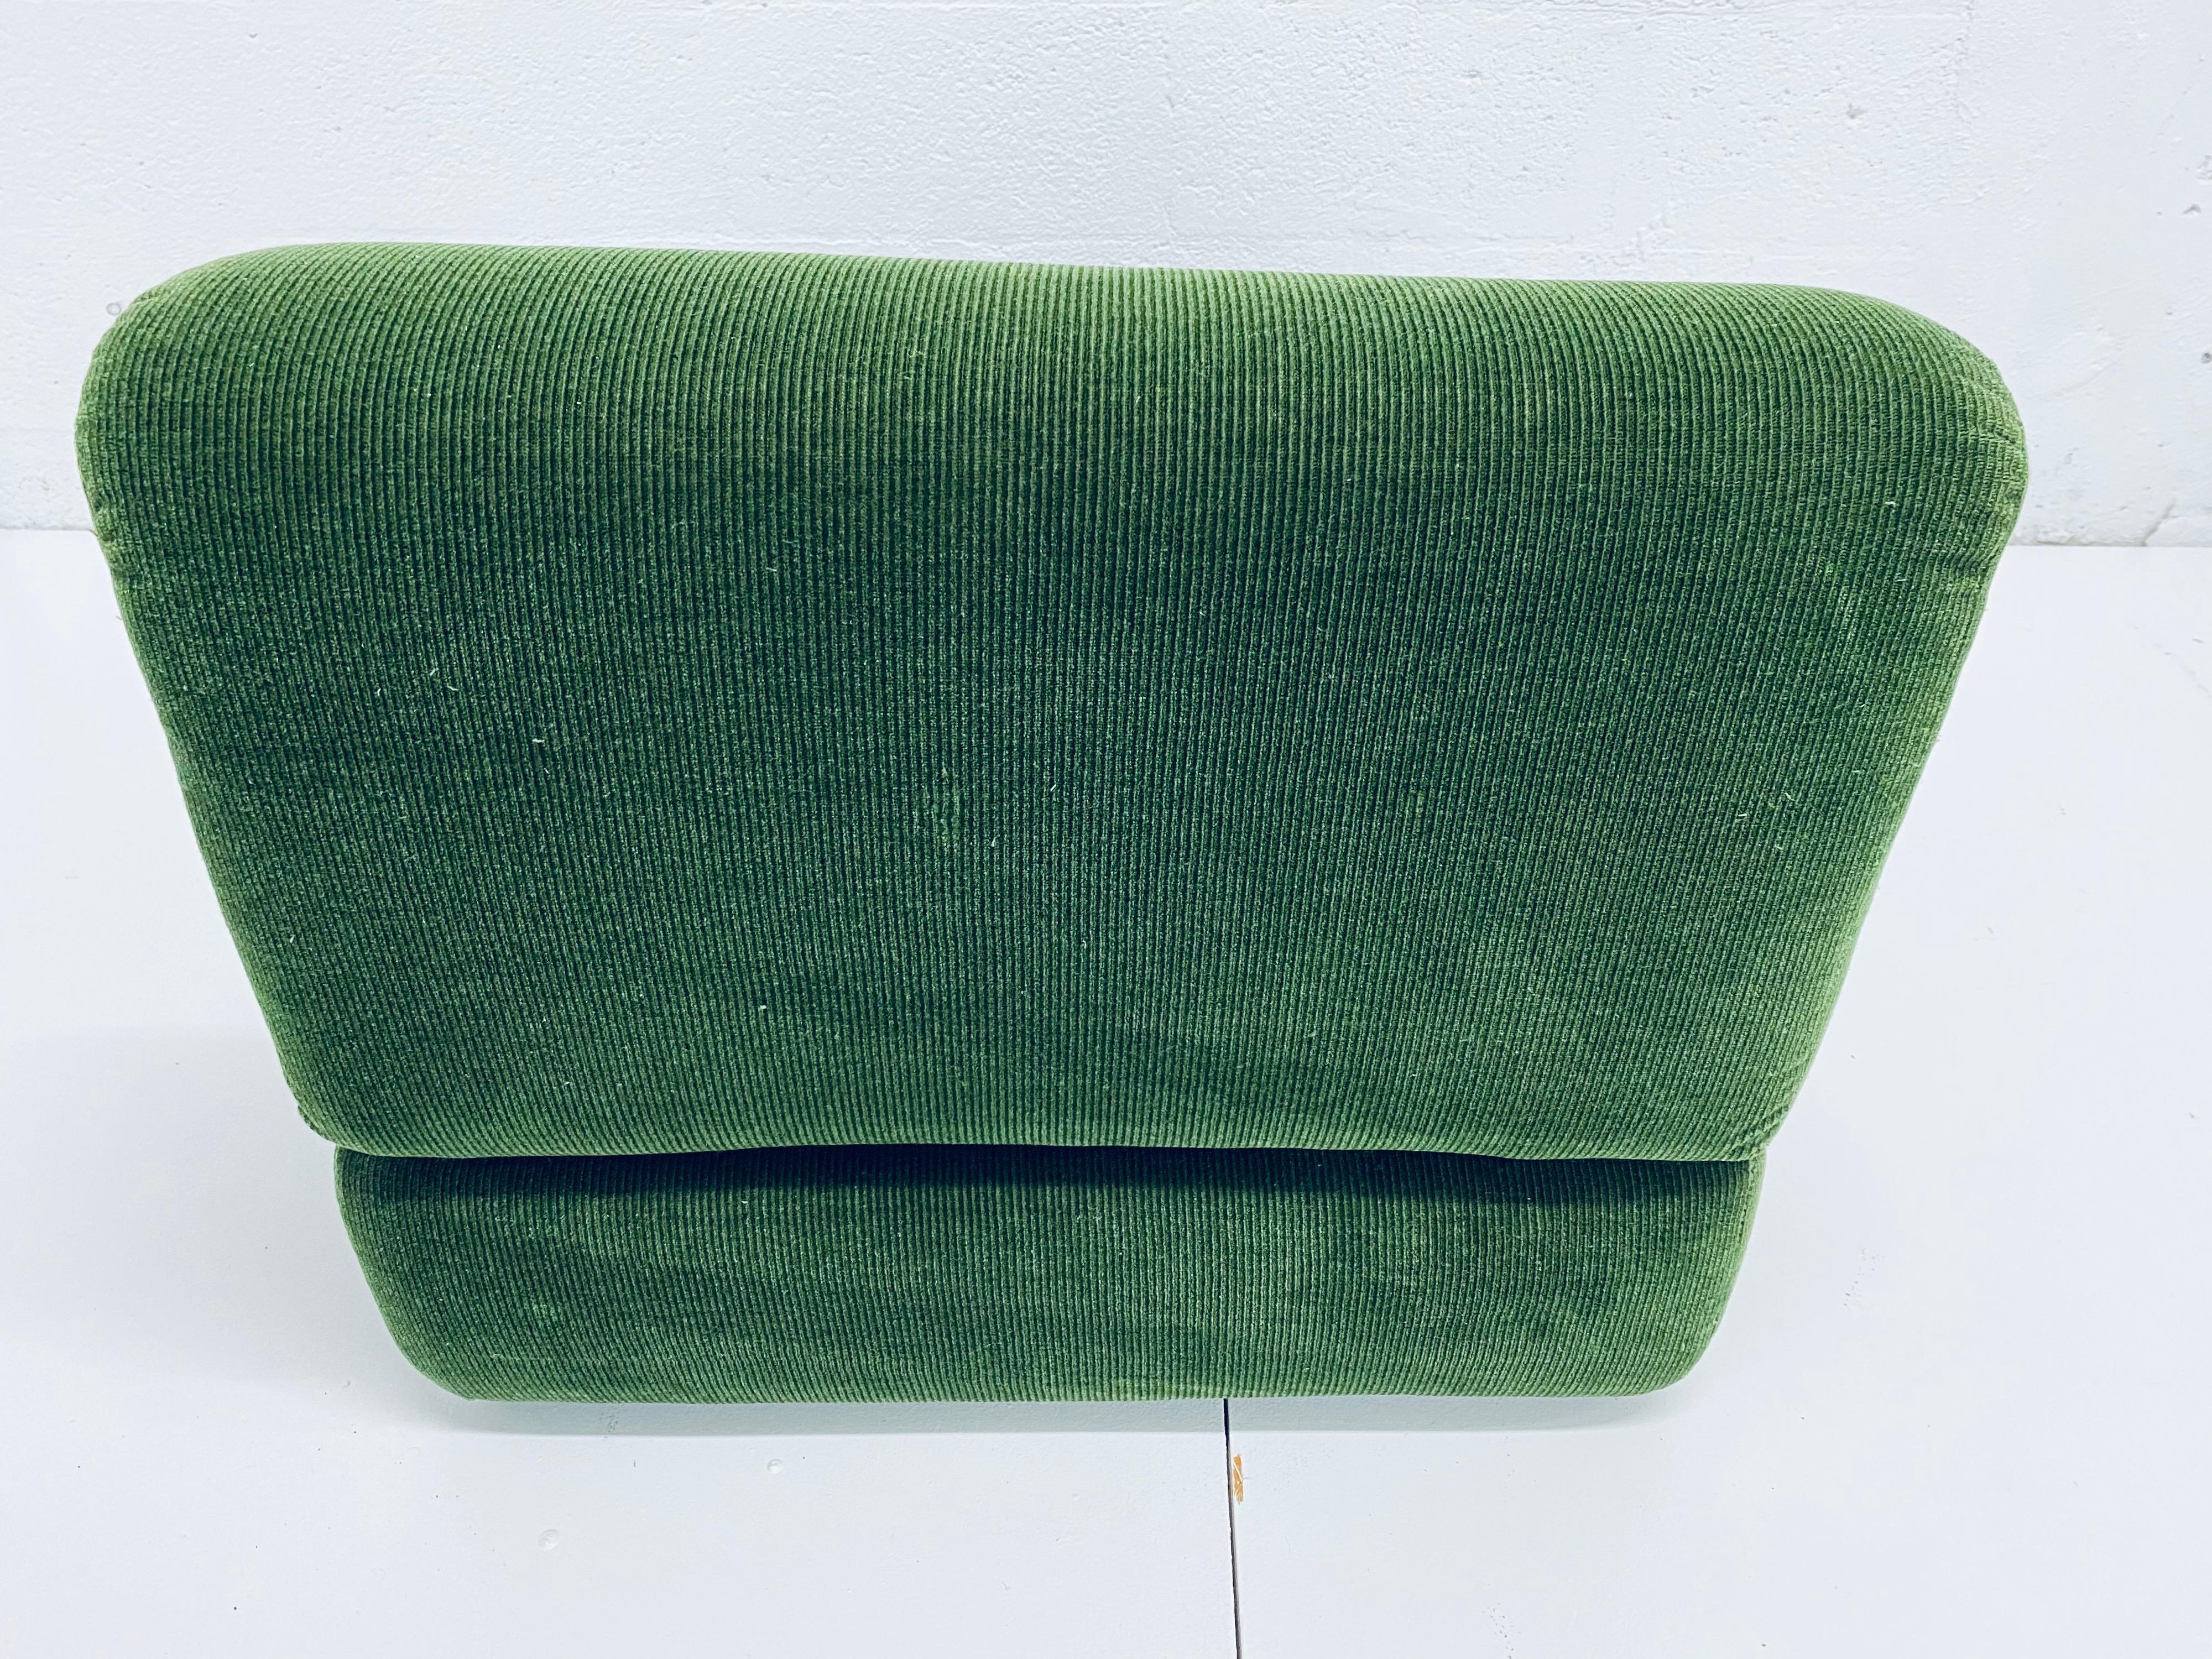 Late 20th Century Pair of Midcentury Green Corduroy Upholstered Convertible Lounge Chair Daybeds